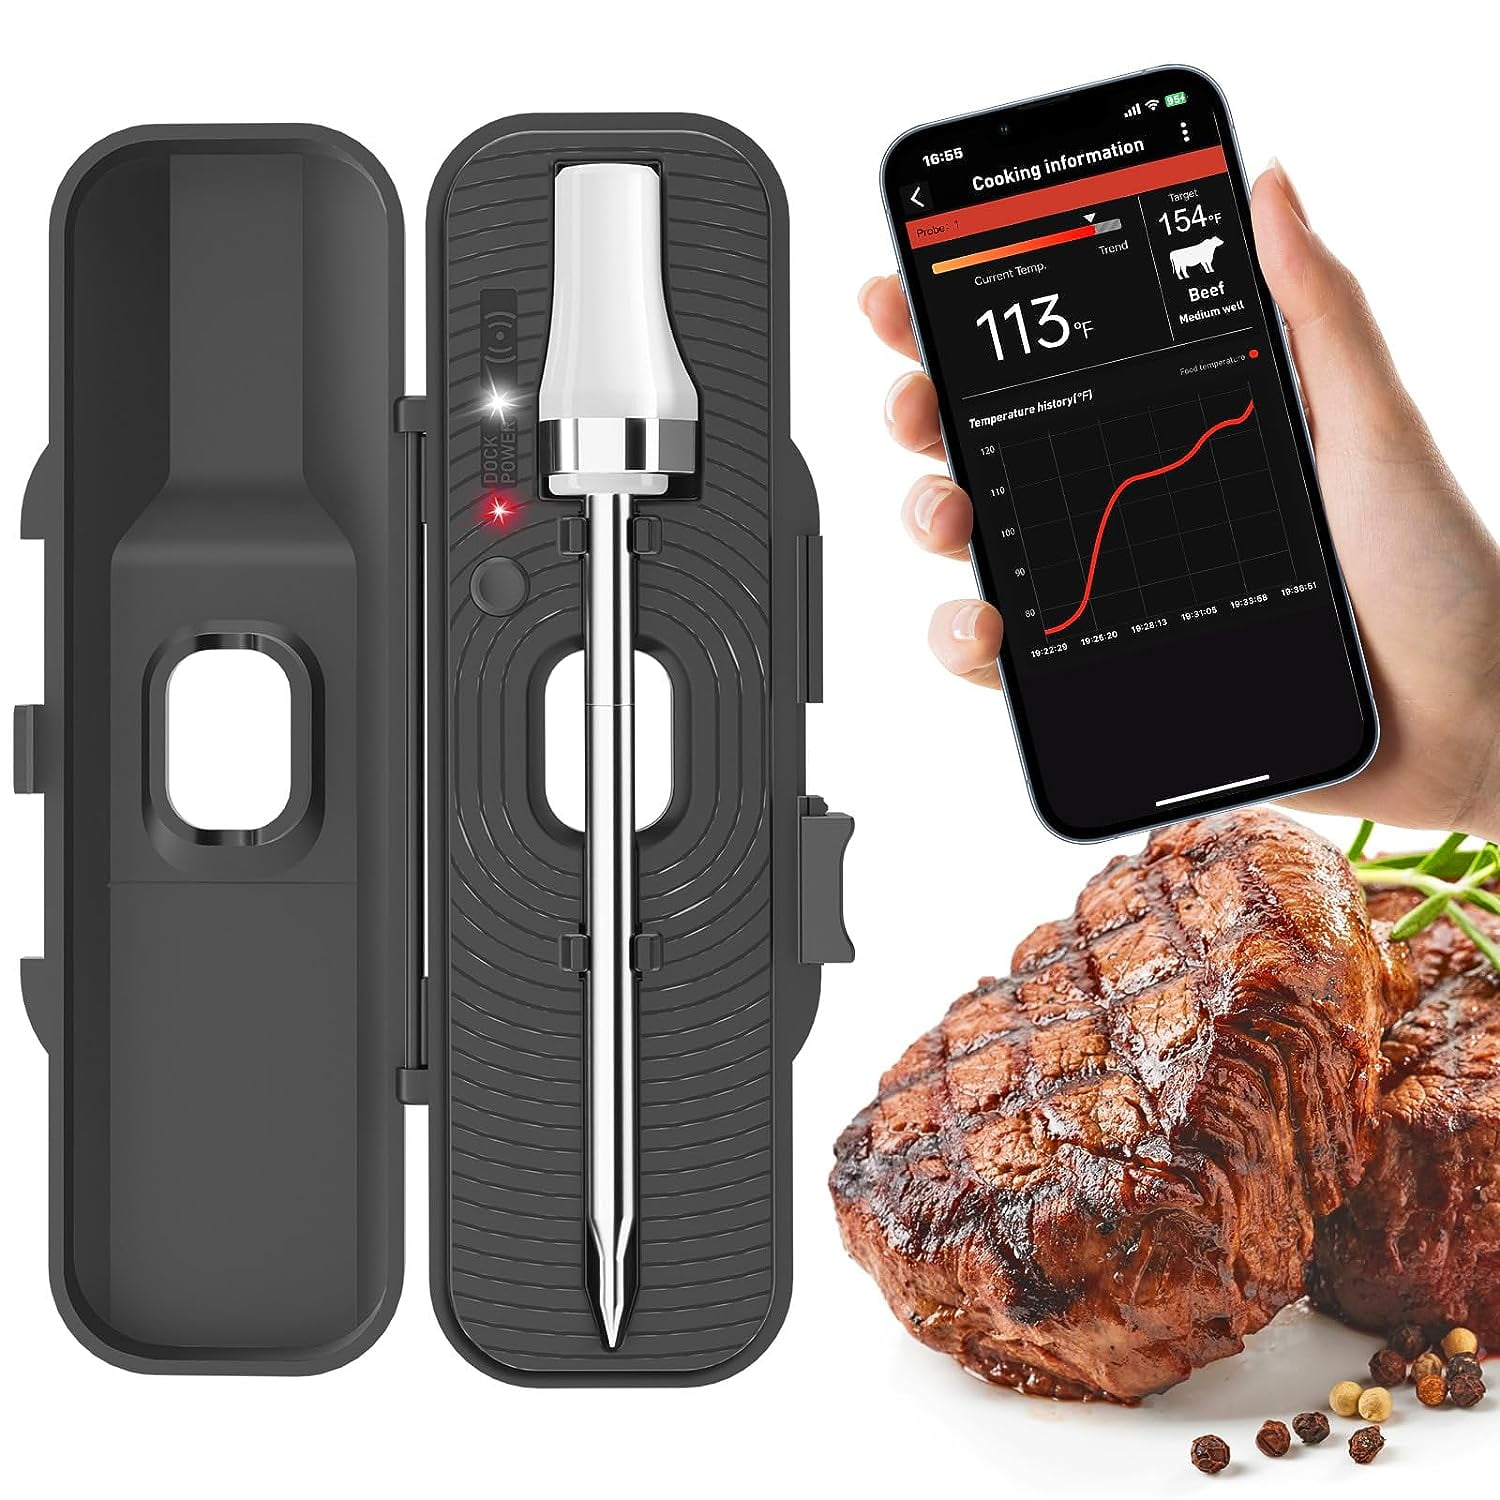 MEATER+ Ext. Range Wireless Bluetooth Meat Thermometer : BBQGuys